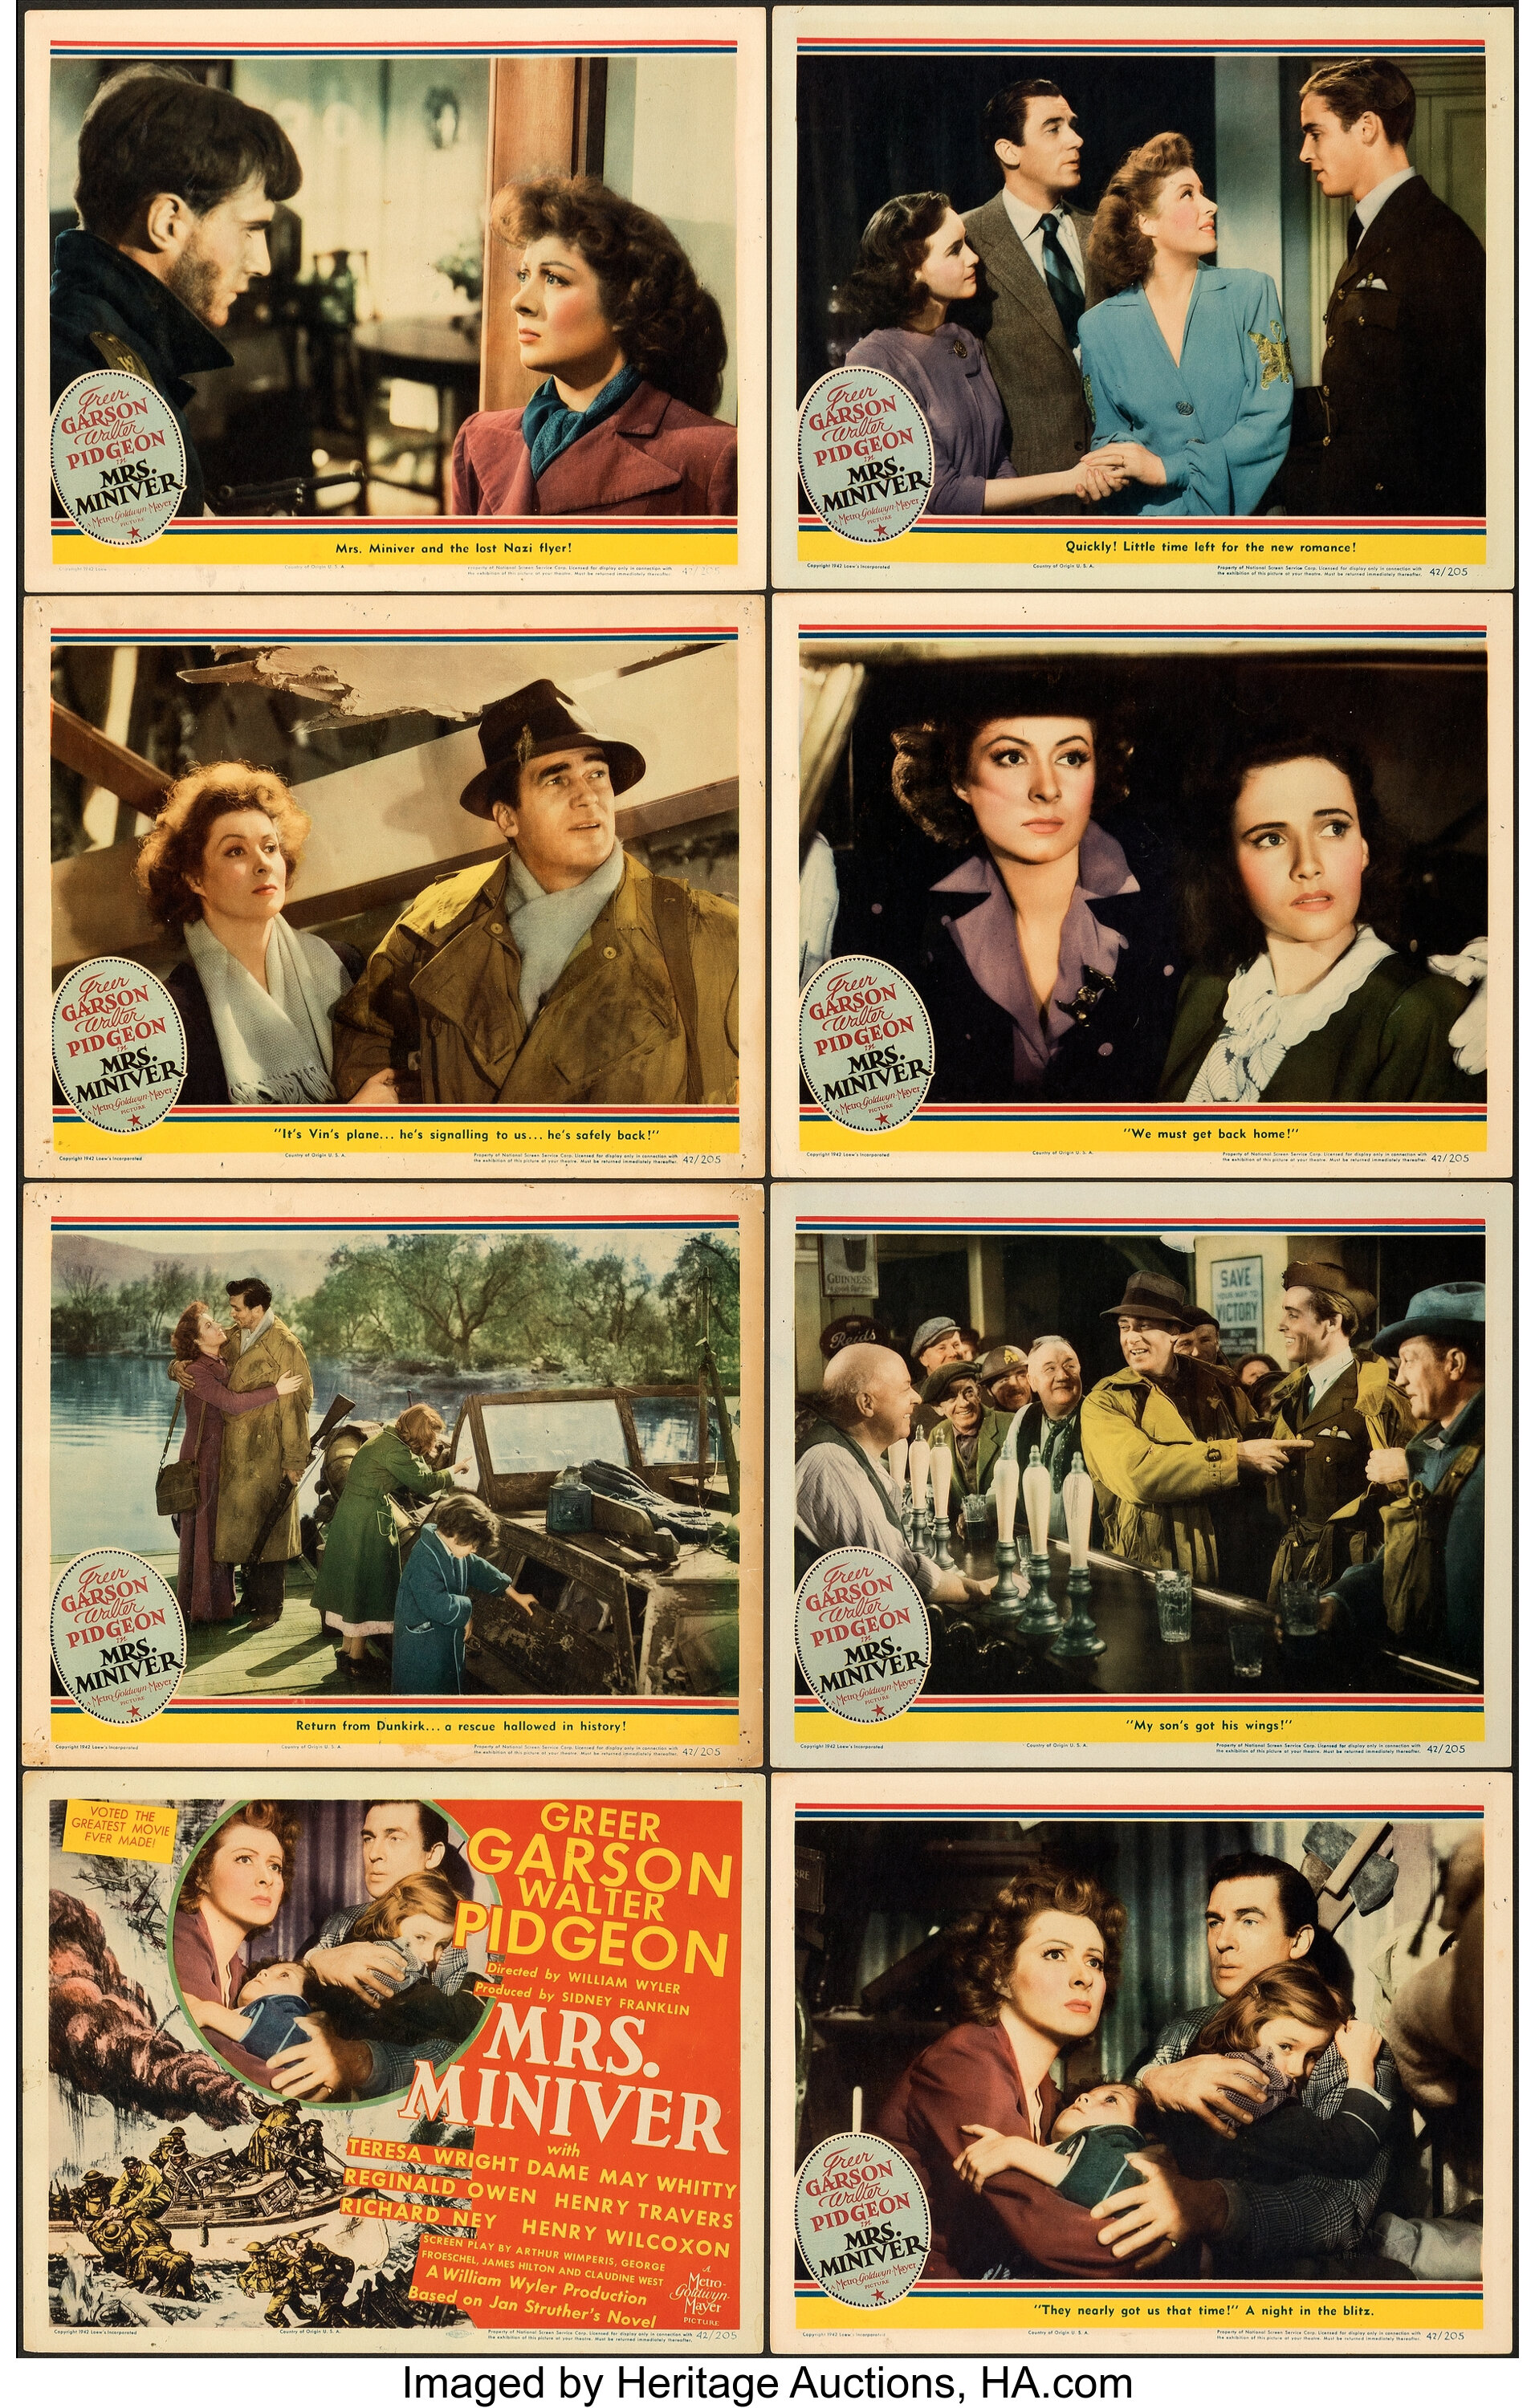 Mrs Miniver Mgm 1942 Very Fine Lobby Card Set Of 8 11 X Lot 86107 Heritage Auctions